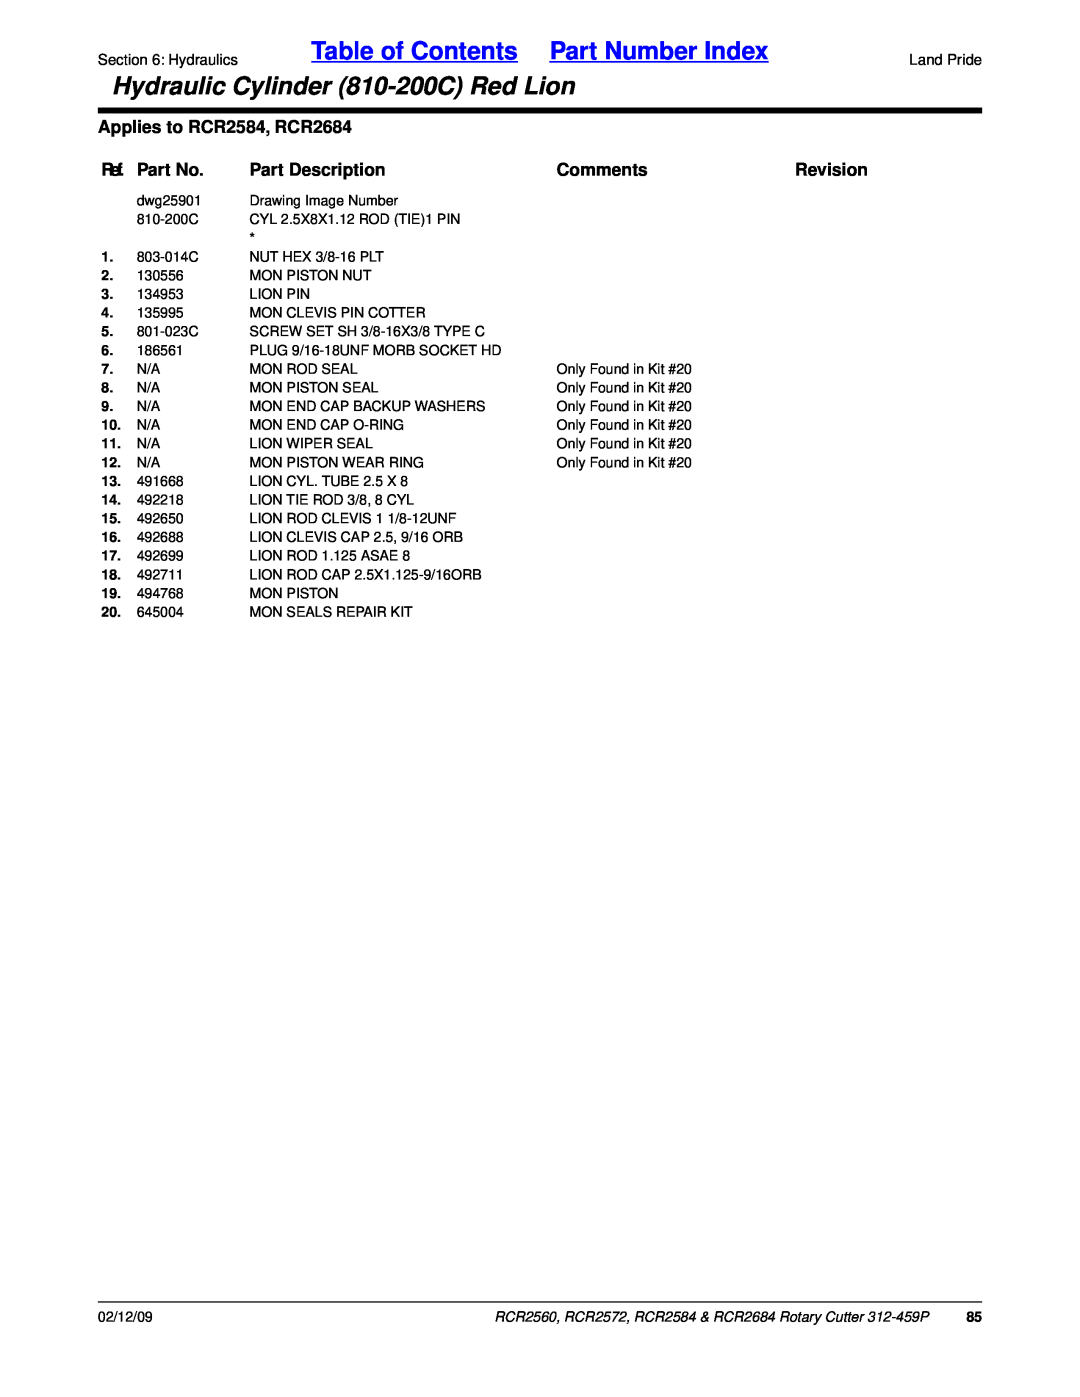 Land Pride manual Table of Contents Part Number Index, Hydraulic Cylinder 810-200CRed Lion, Applies to RCR2584, RCR2684 